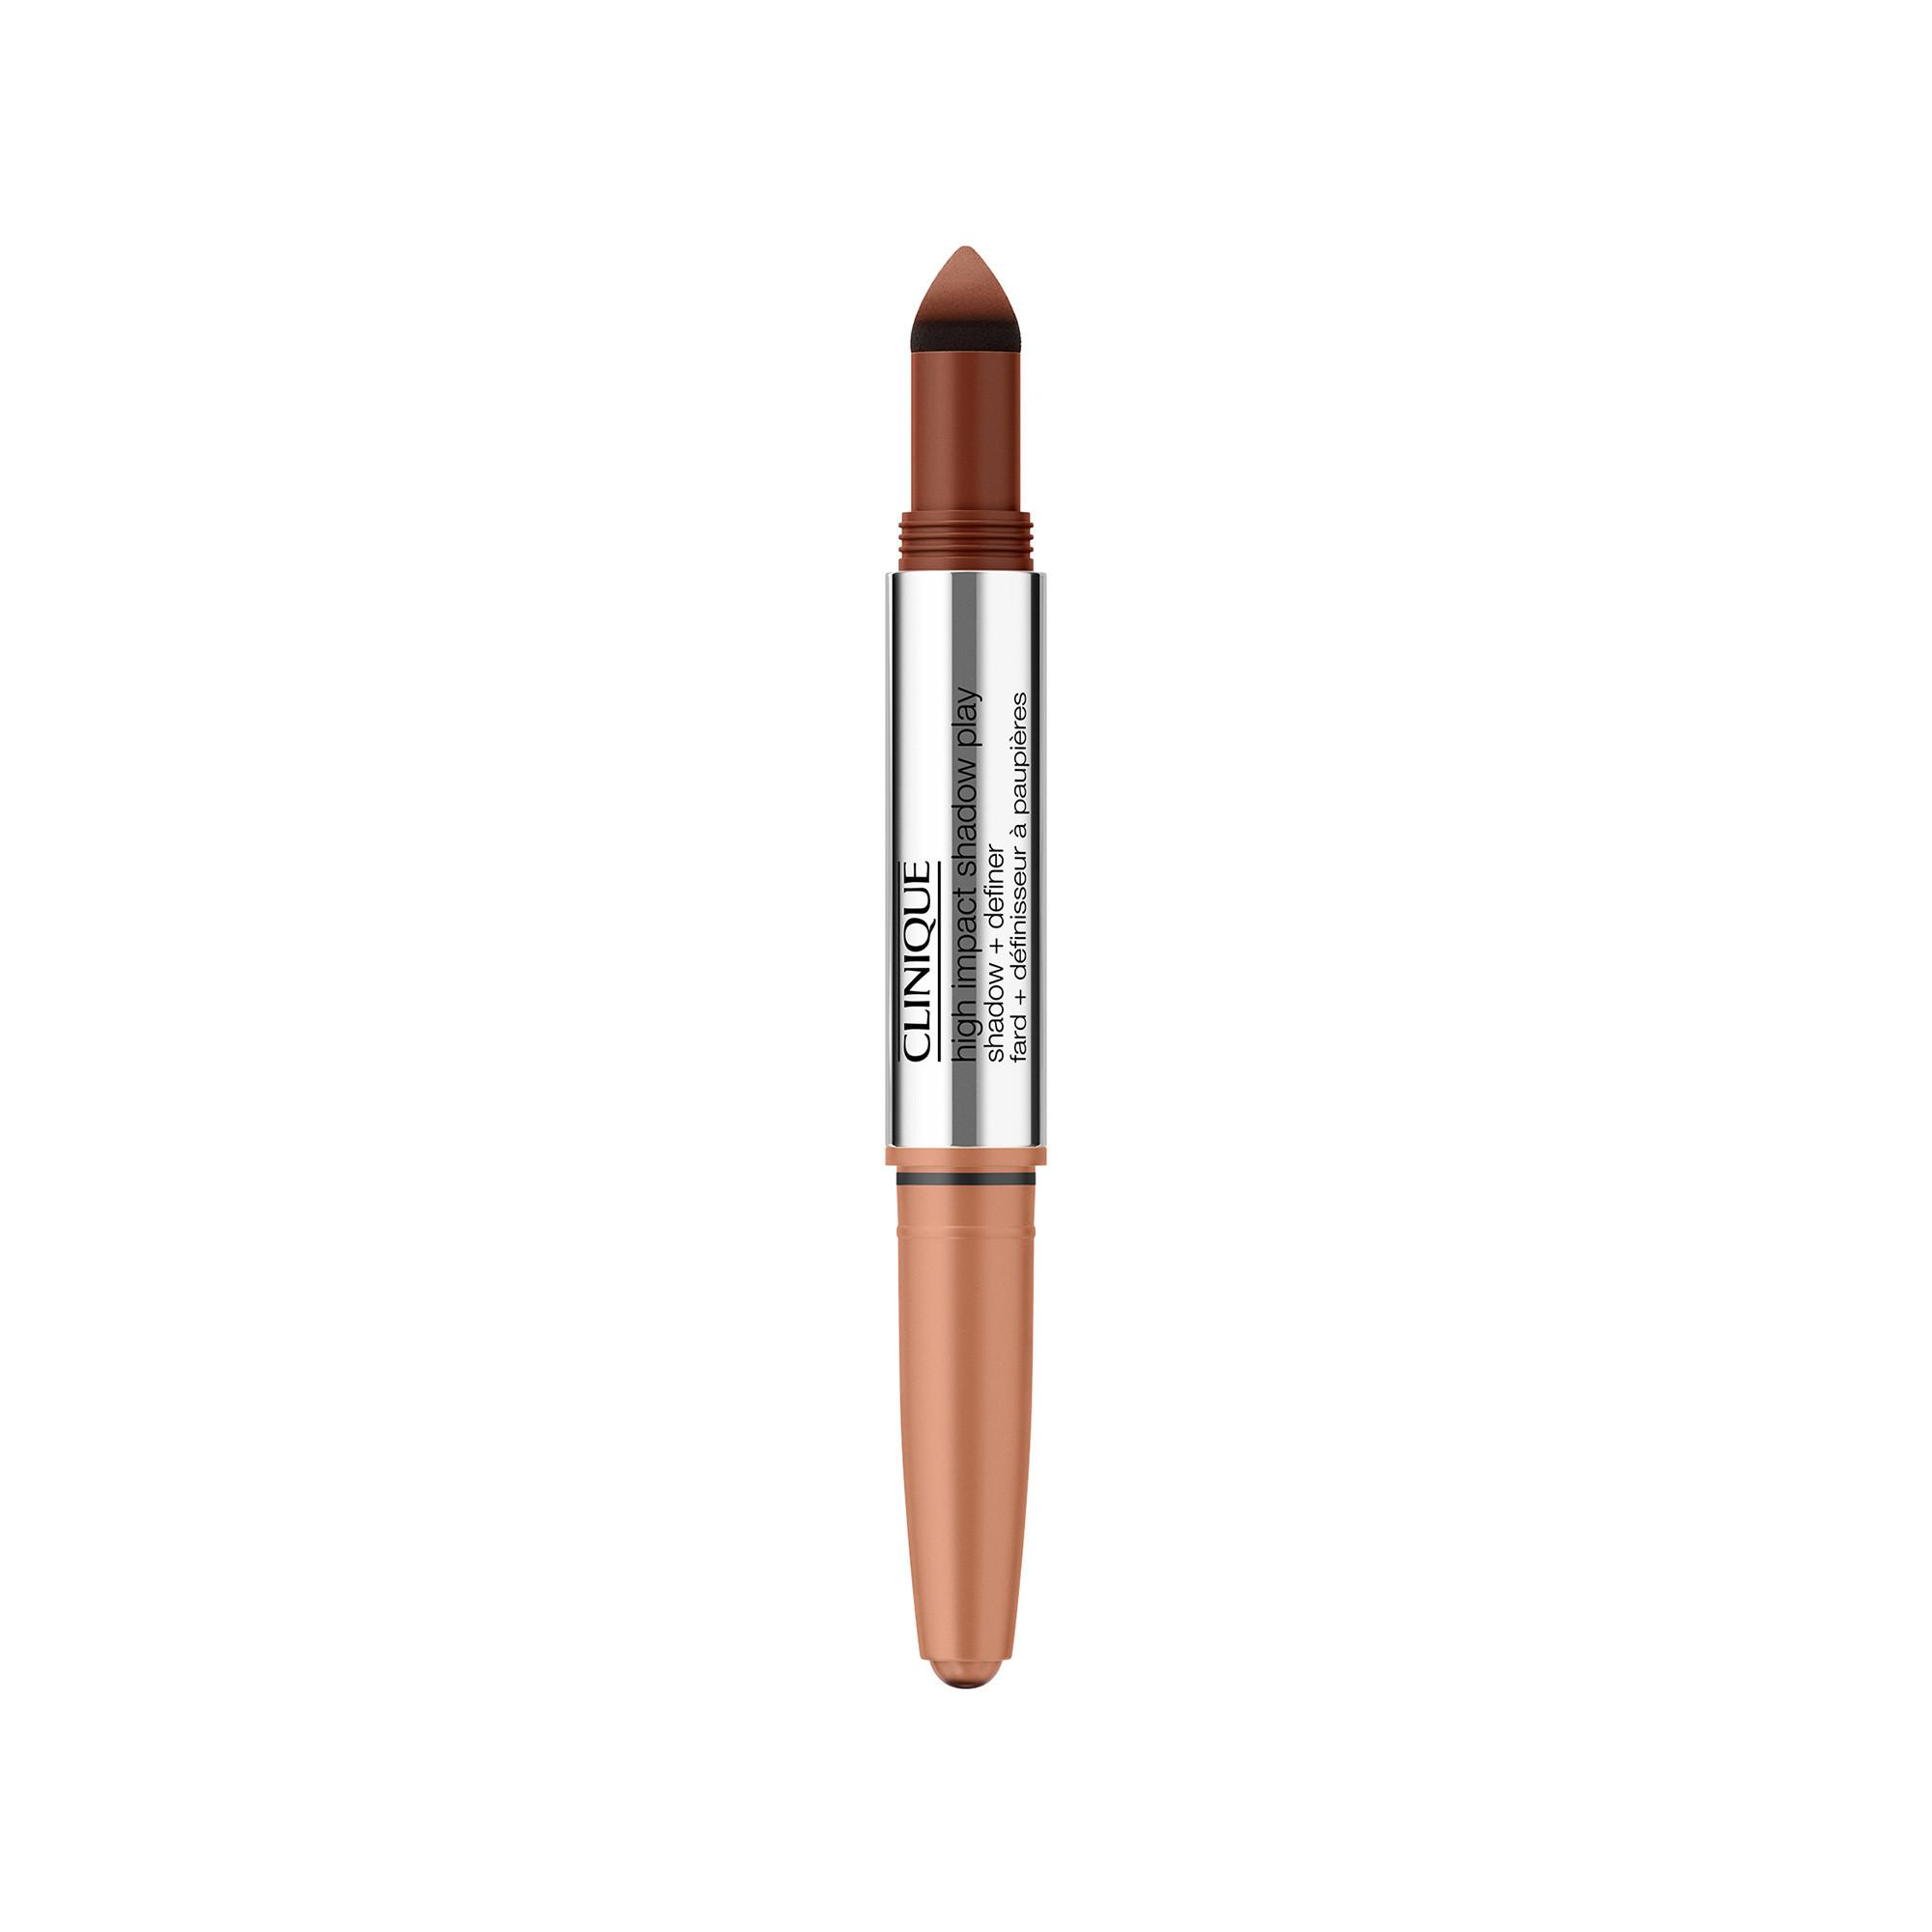 CLINIQUE High Impact Shadow Play™ Shadow + Definer Unisexe Flame + Ember 4ml